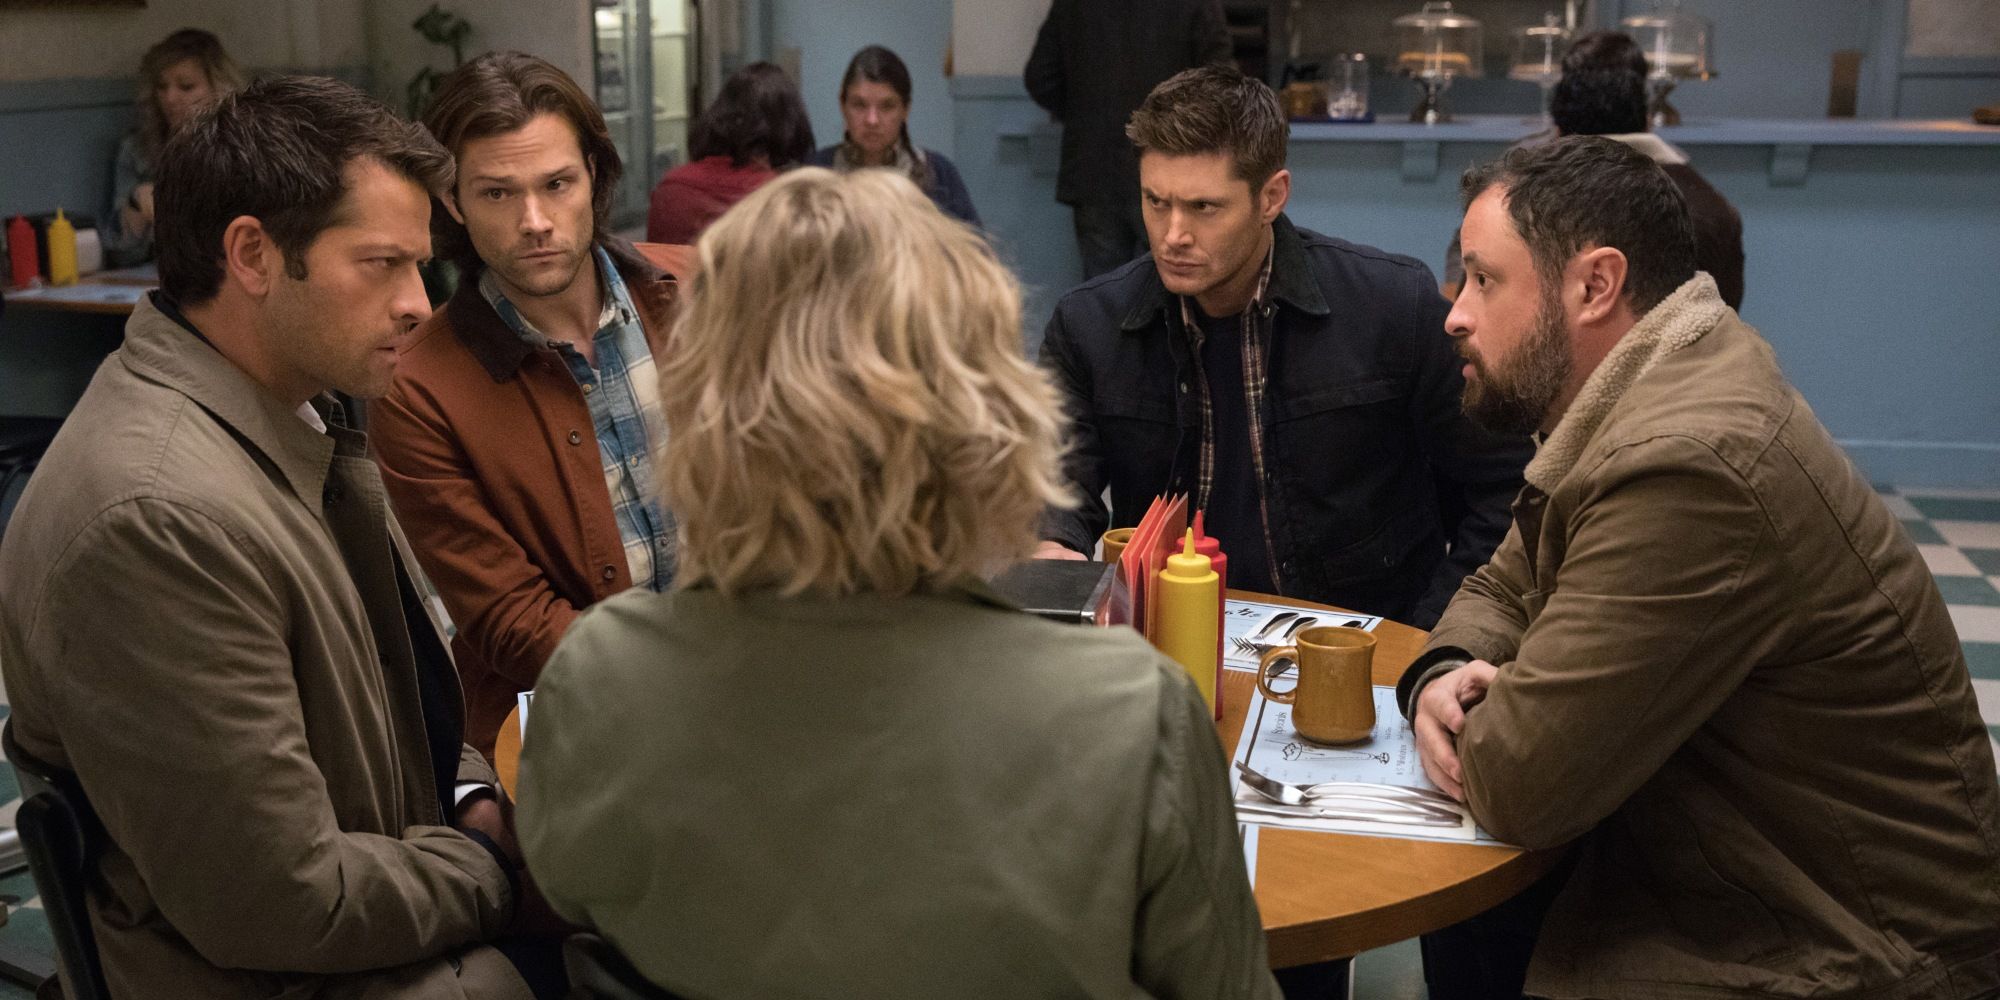 Characters from Supernatural sitting in a table otgether